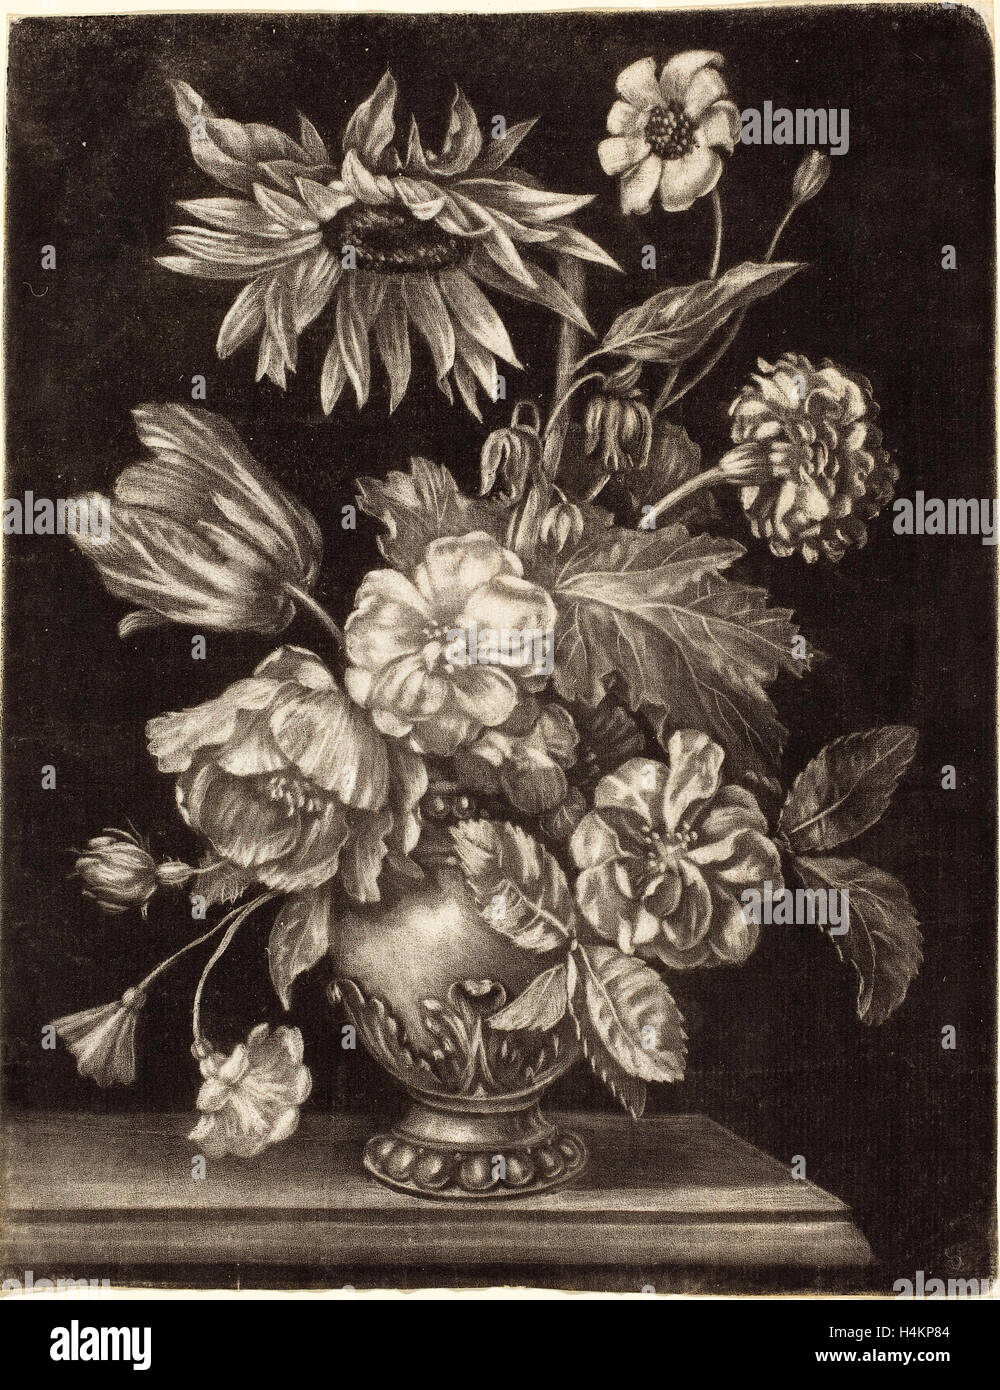 Elias Christoph Heiss (German, 1660 - 1731), Floral Still Life with a Sunflower, c. 1690, mezzotint on laid paper Stock Photo